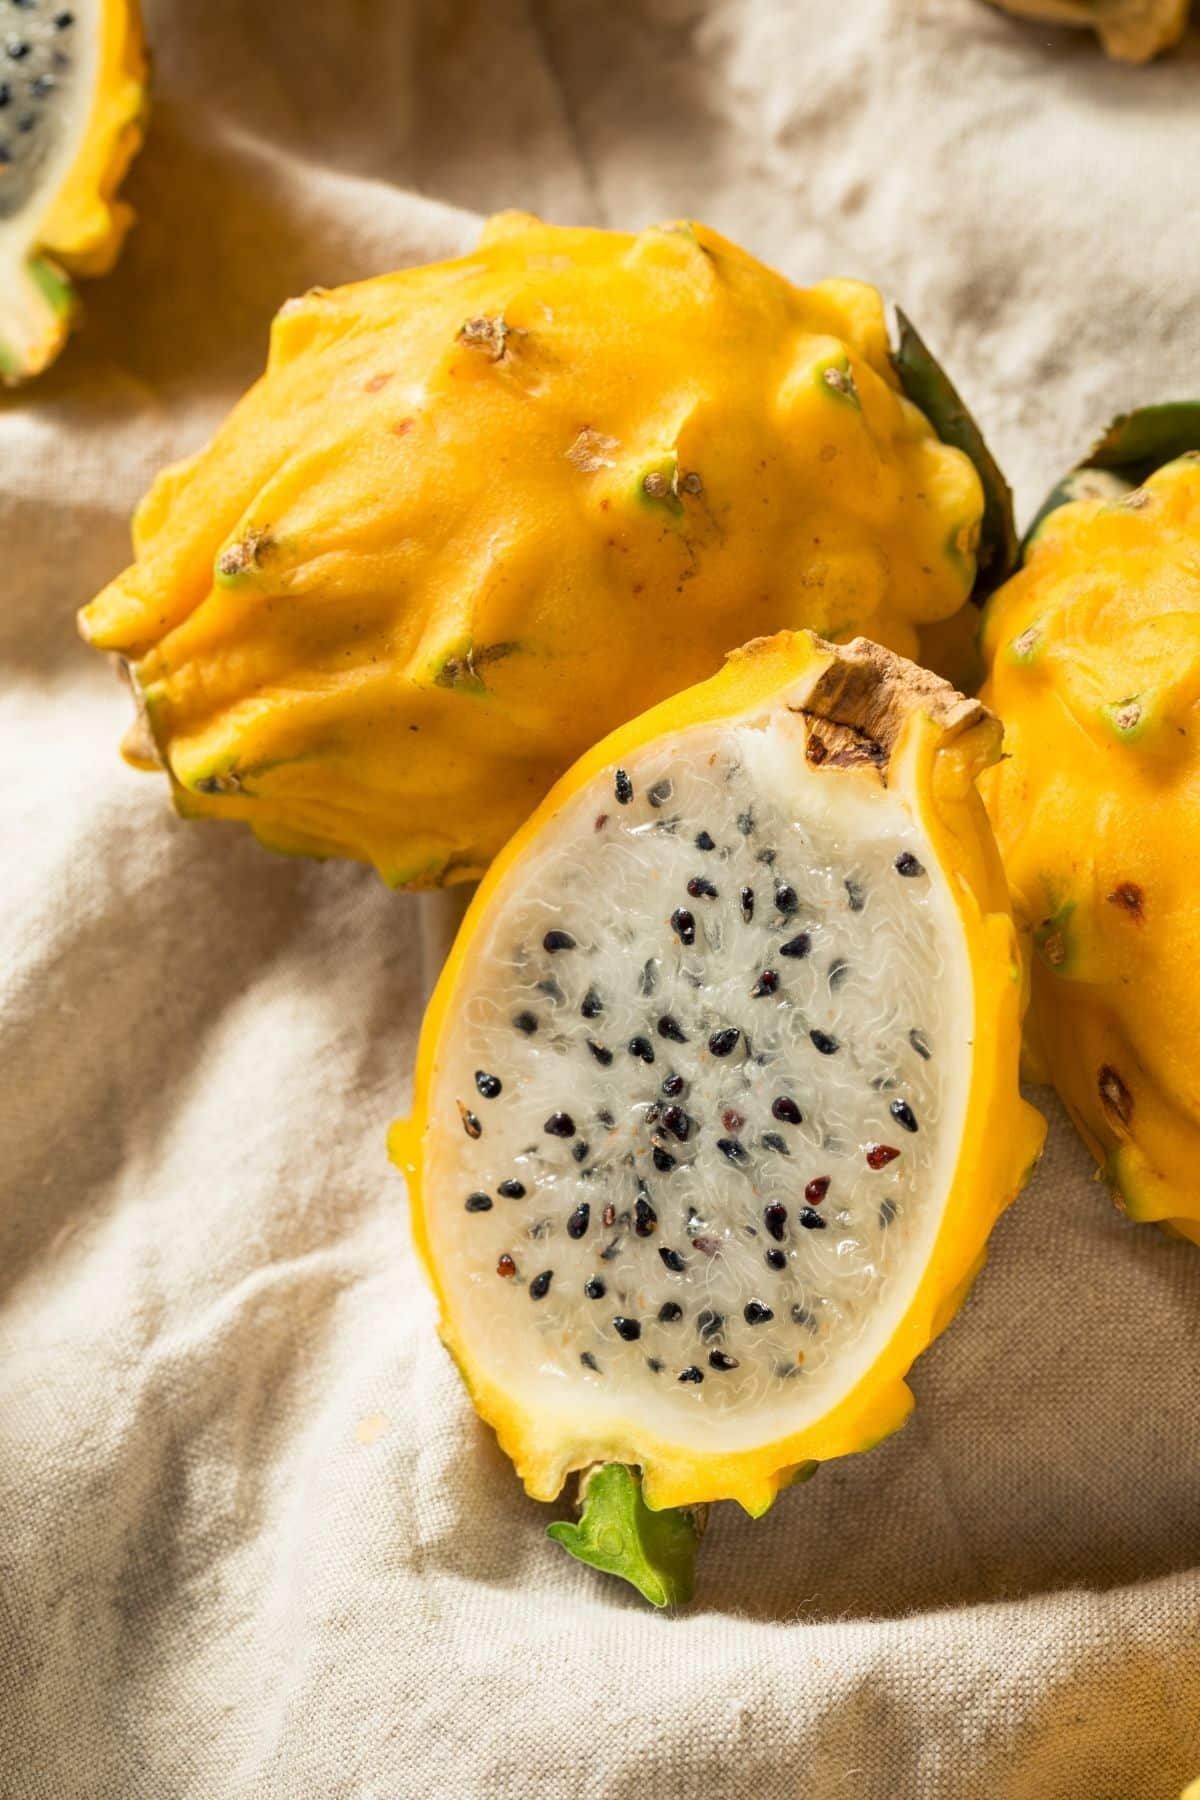 several yellow dragon fruit cut in half on a table.